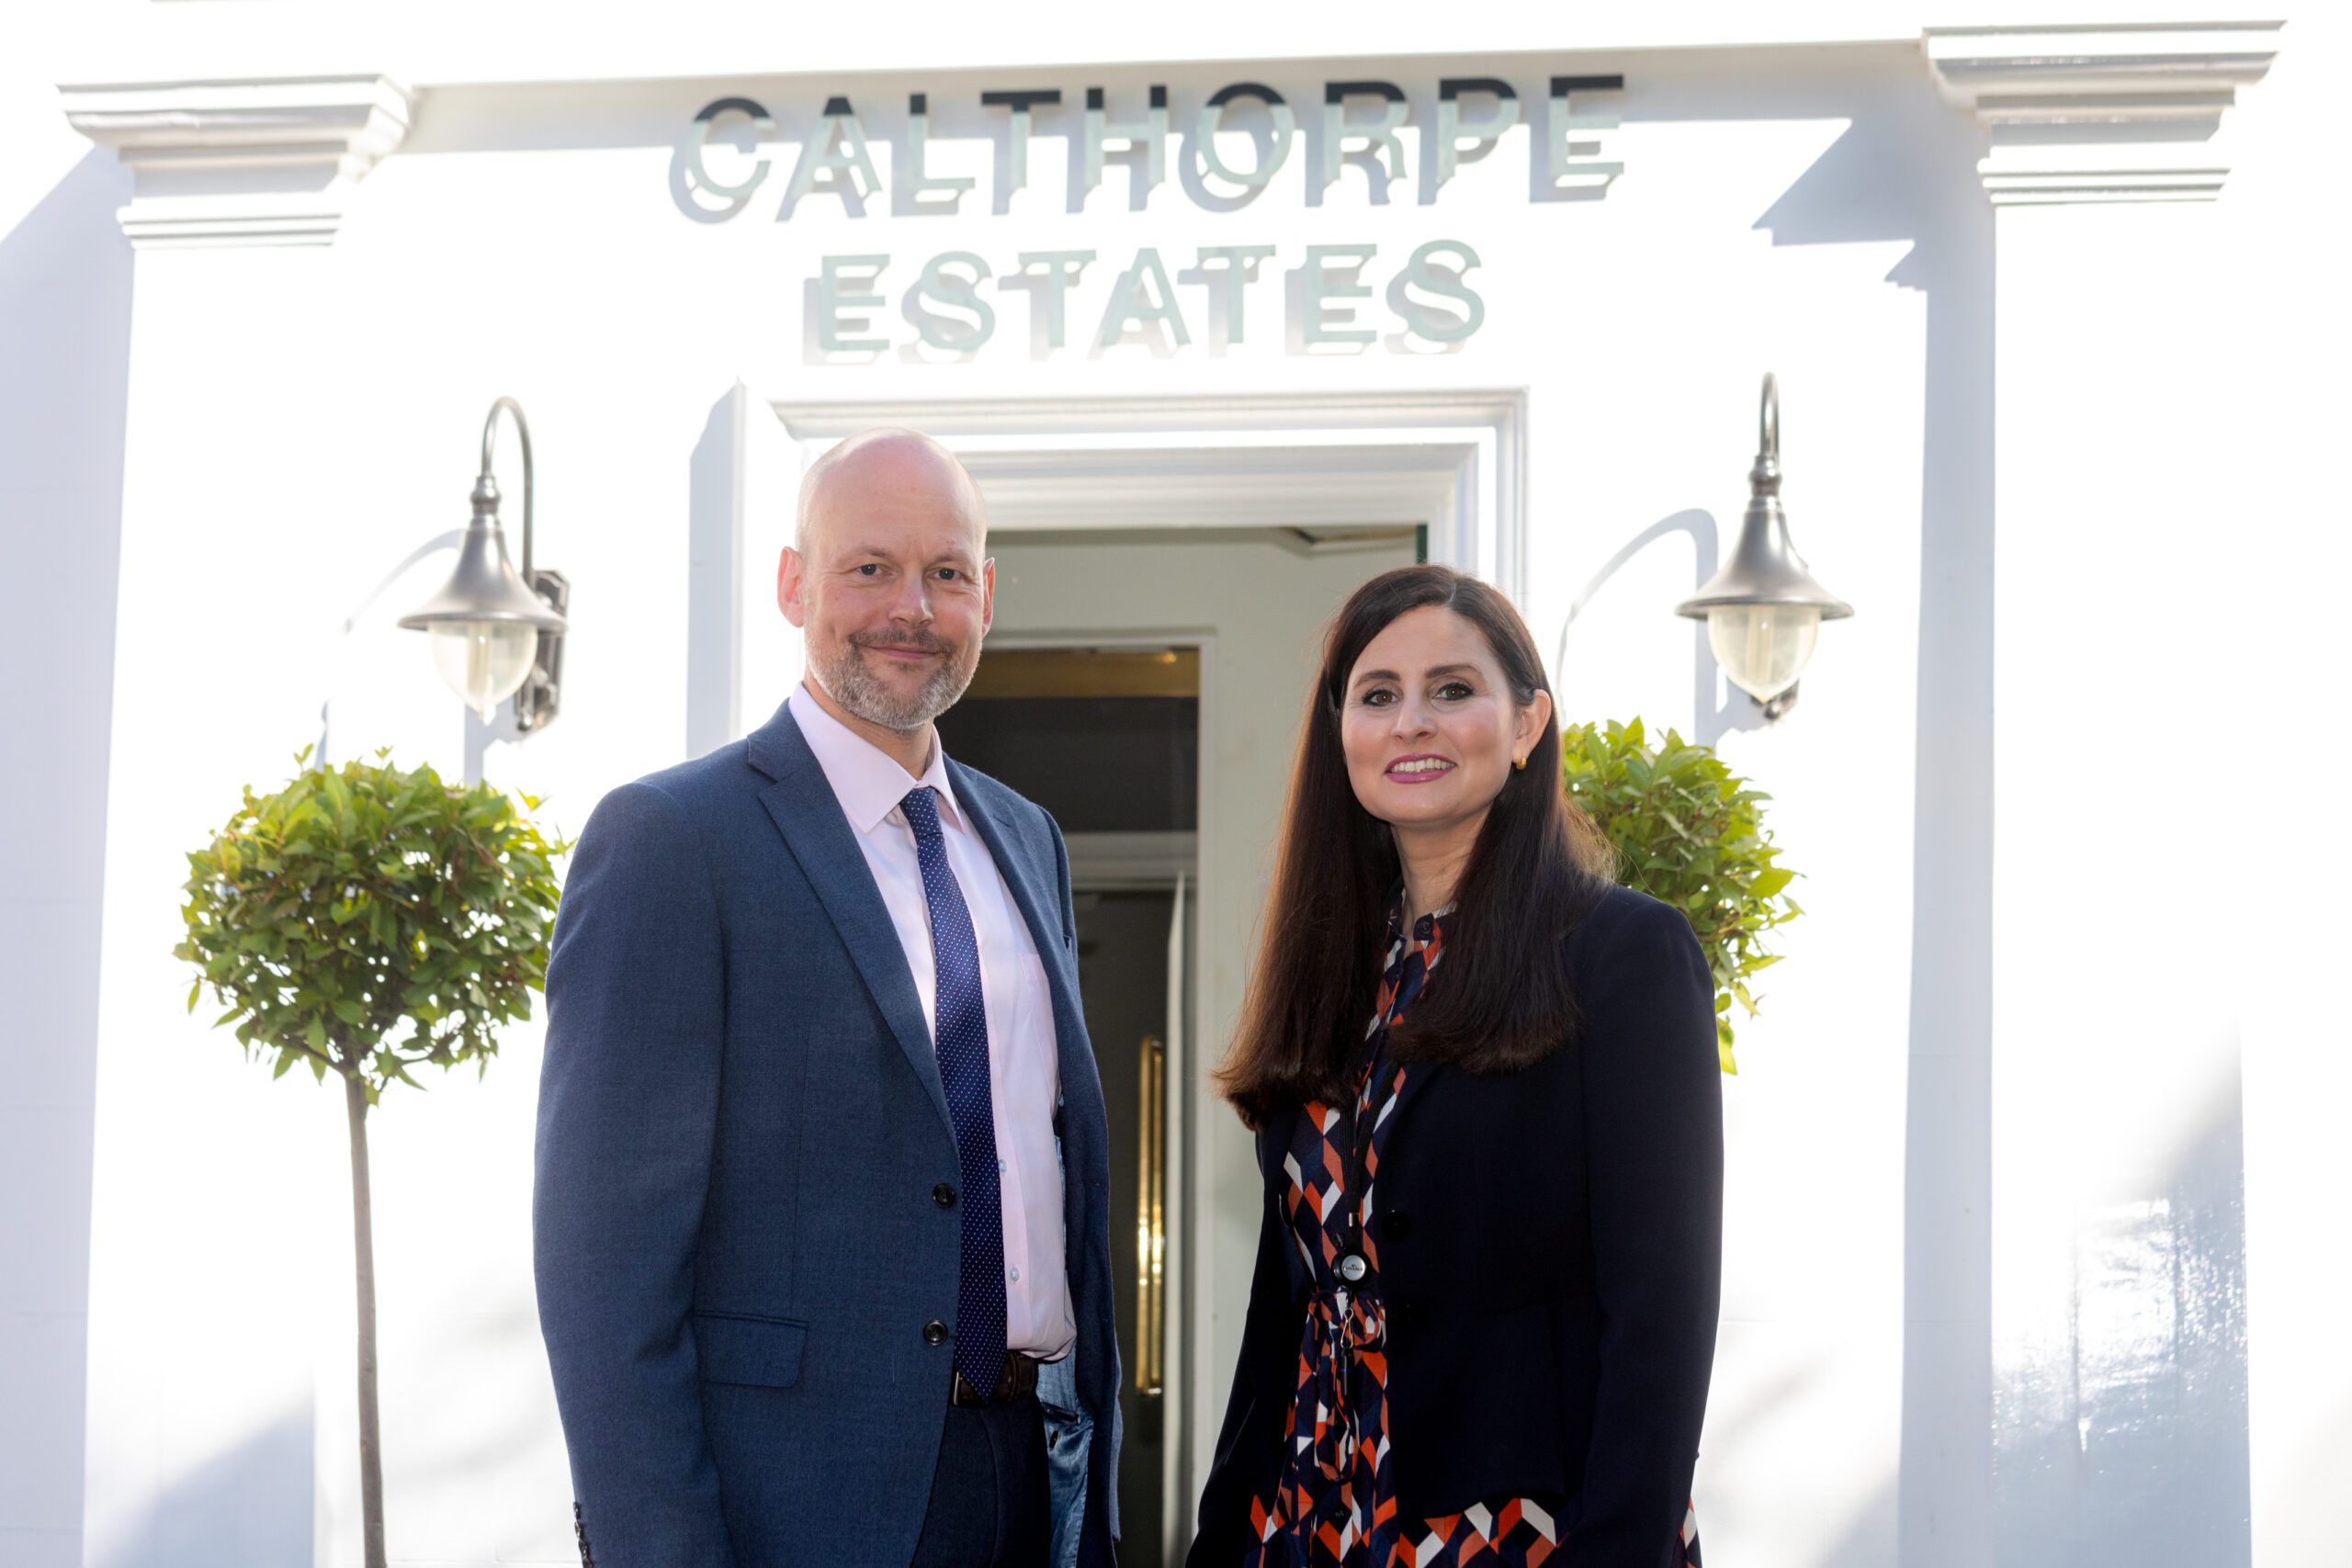 Calthorpe Estates strengthens its team with two new appointments